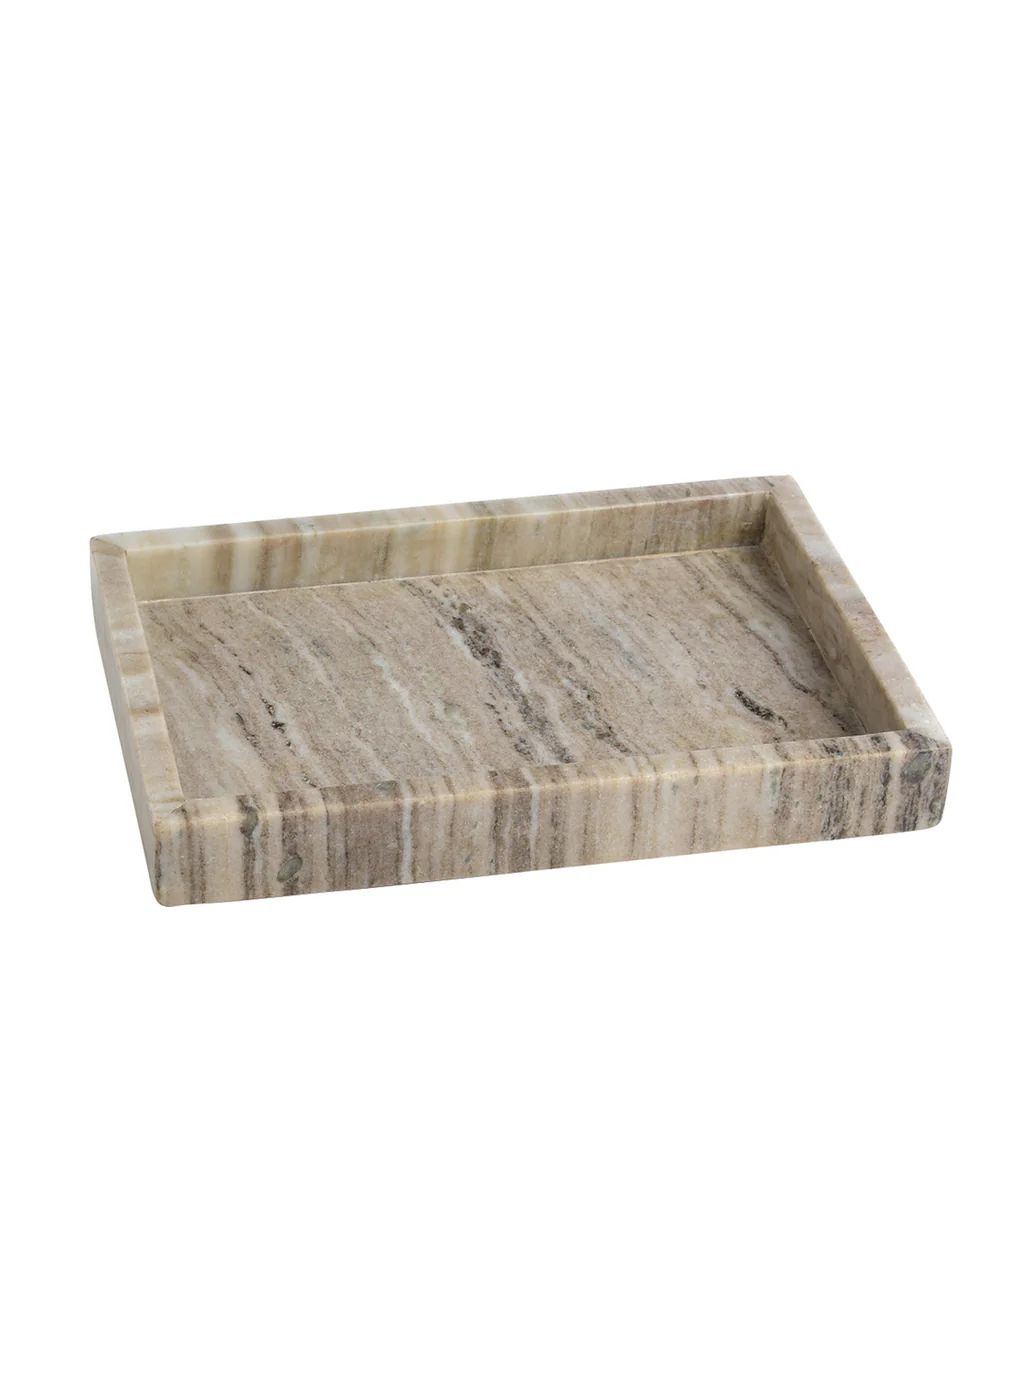 Beige Marble Tray | House of Jade Home